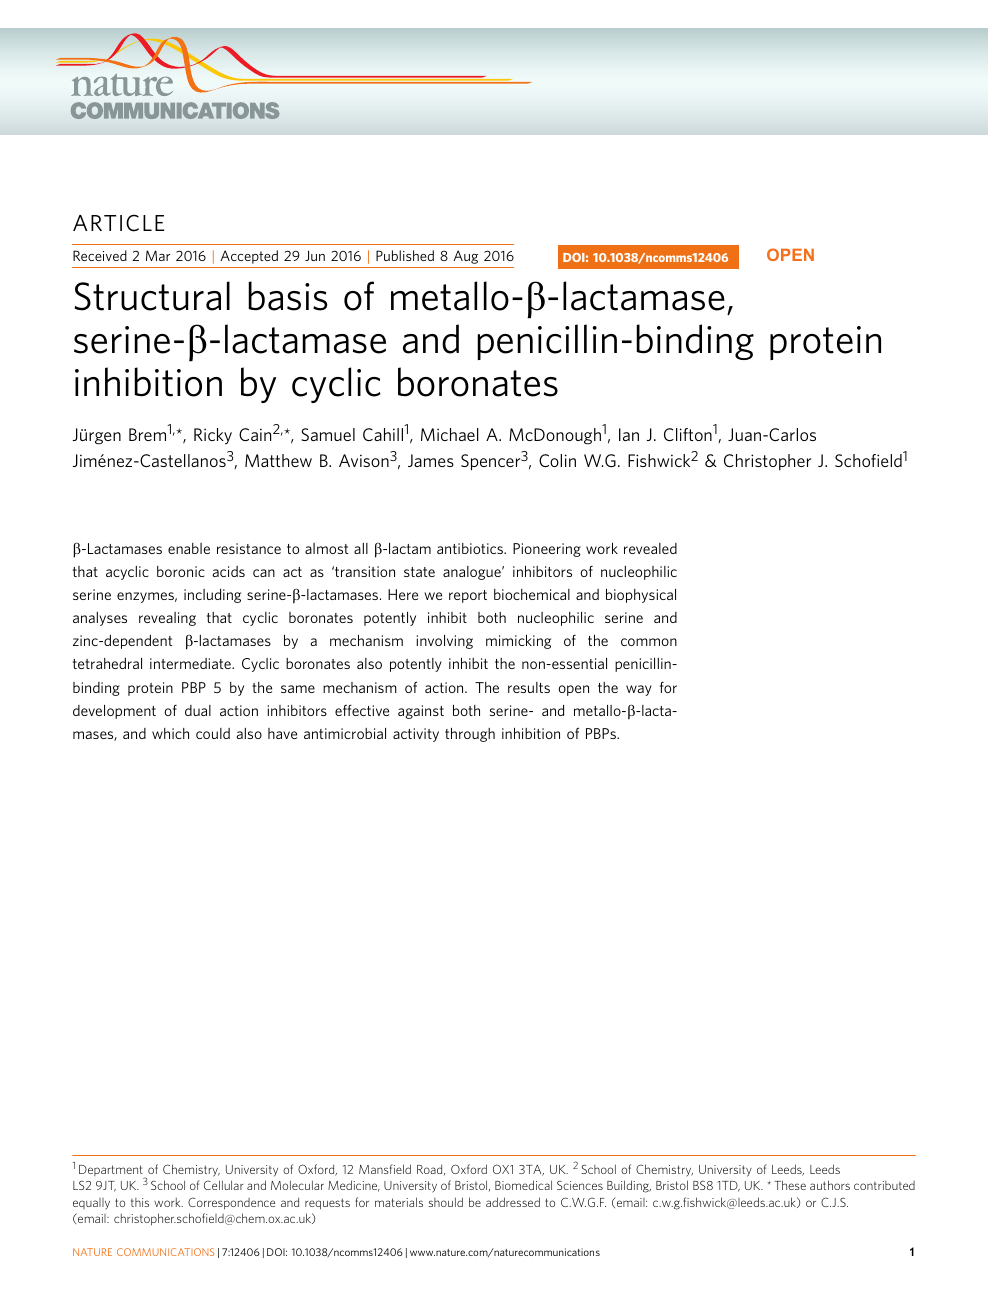 Structural Basis Of Metallo B Lactamase Serine B Lactamase And Penicillin Binding Protein Inhibition By Cyclic Boronates Topic Of Research Paper In Biological Sciences Download Scholarly Article Pdf And Read For Free On Cyberleninka Open Science